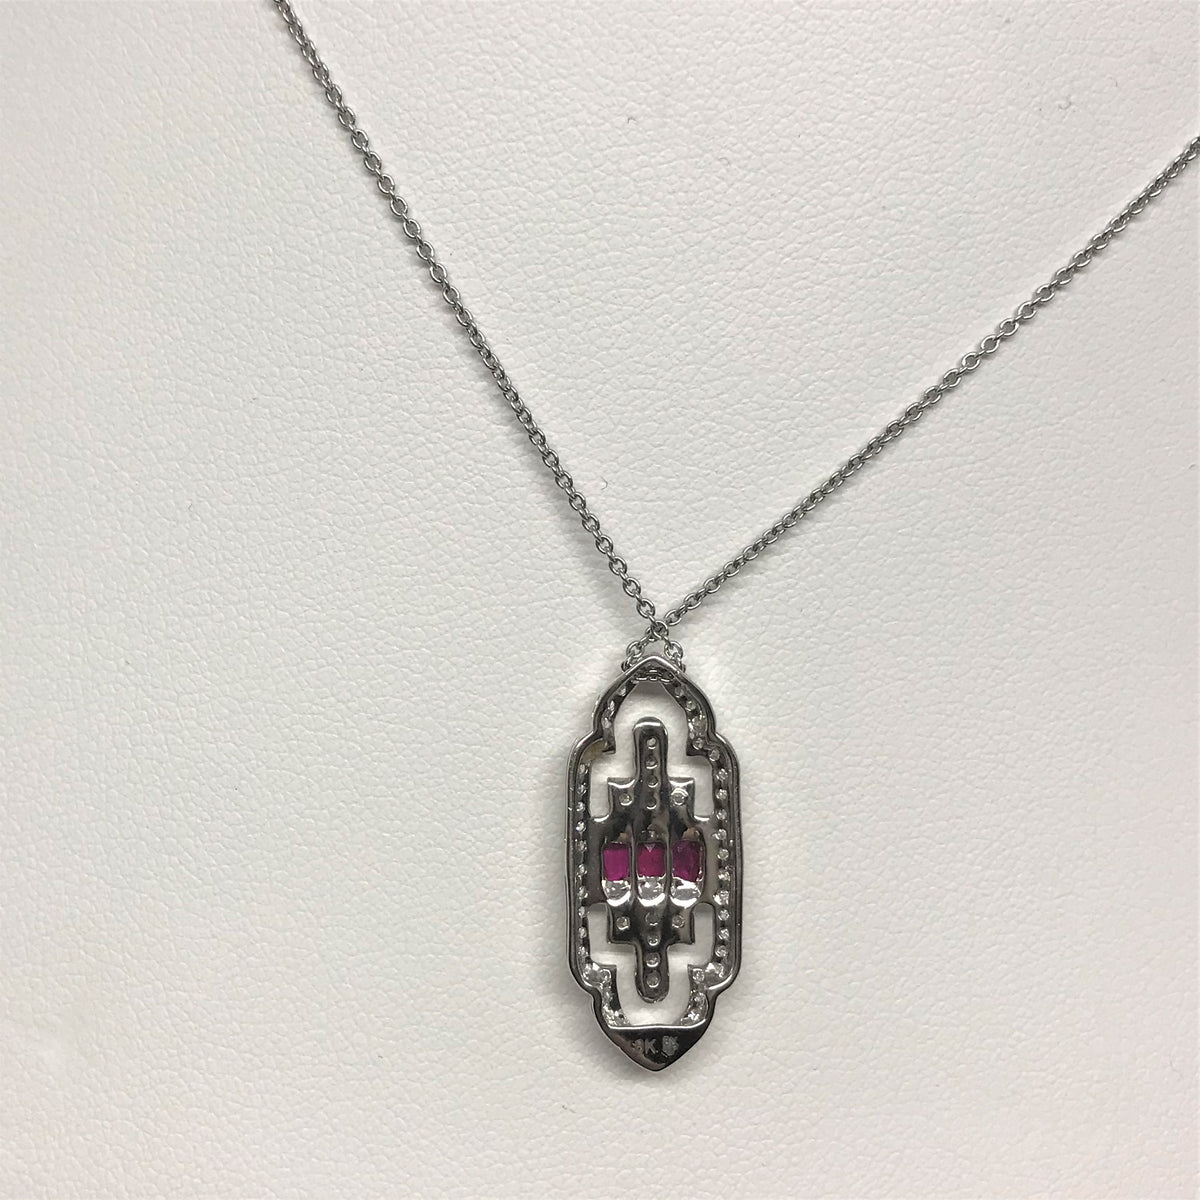 18K White Gold Art Deco Inspired Diamond And Ruby Necklace